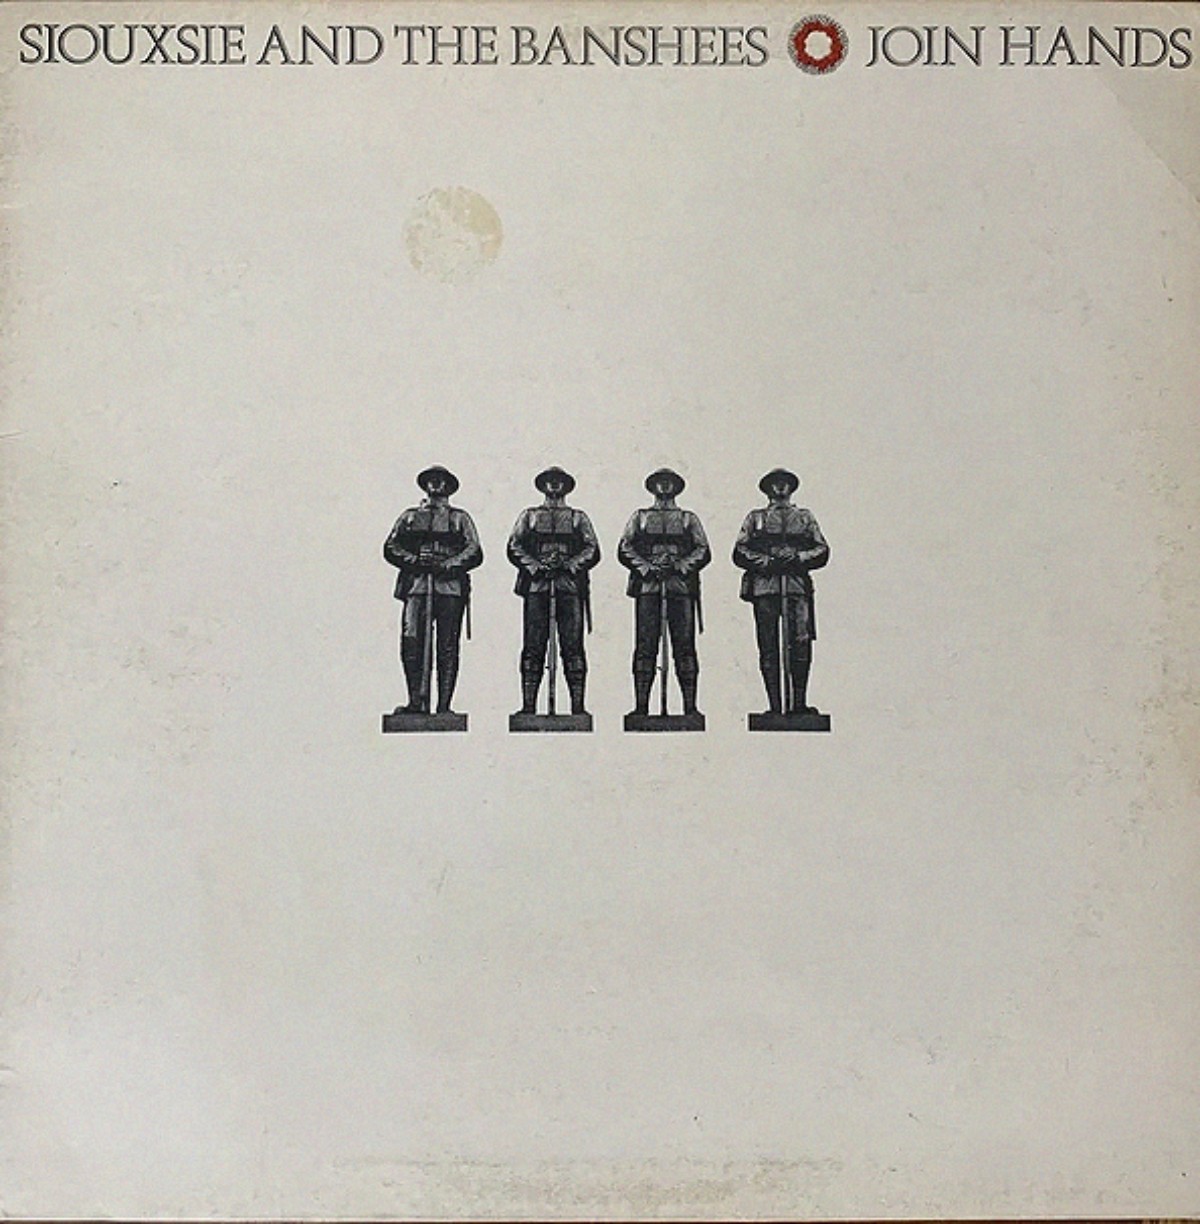 Siouxsie And The Banshees, "Join Hands" (1979)